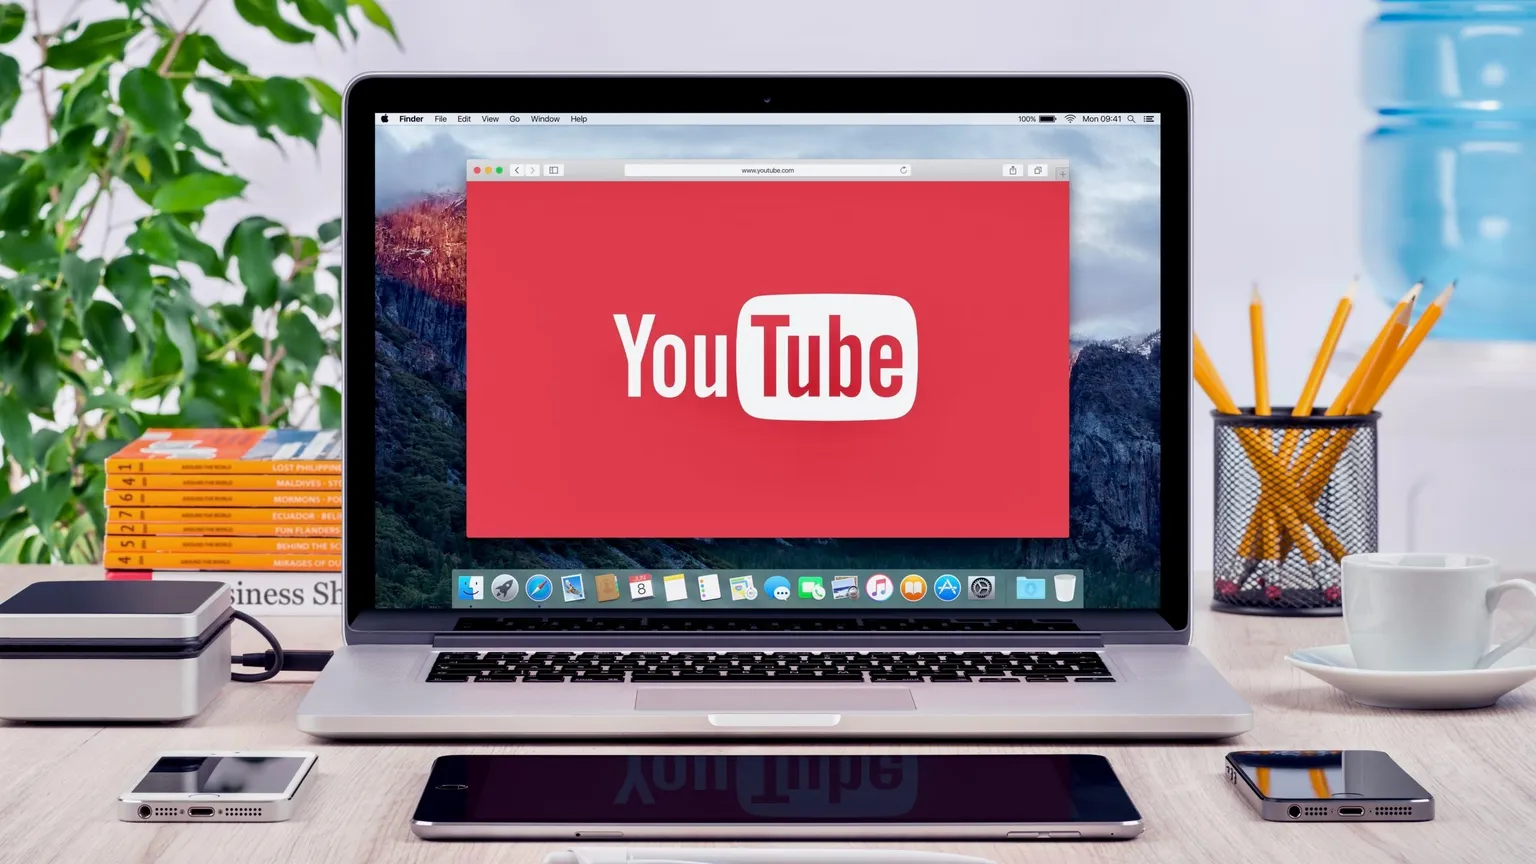 YouTube is one of the largest video streaming services on the planet. Image: Shutterstock.